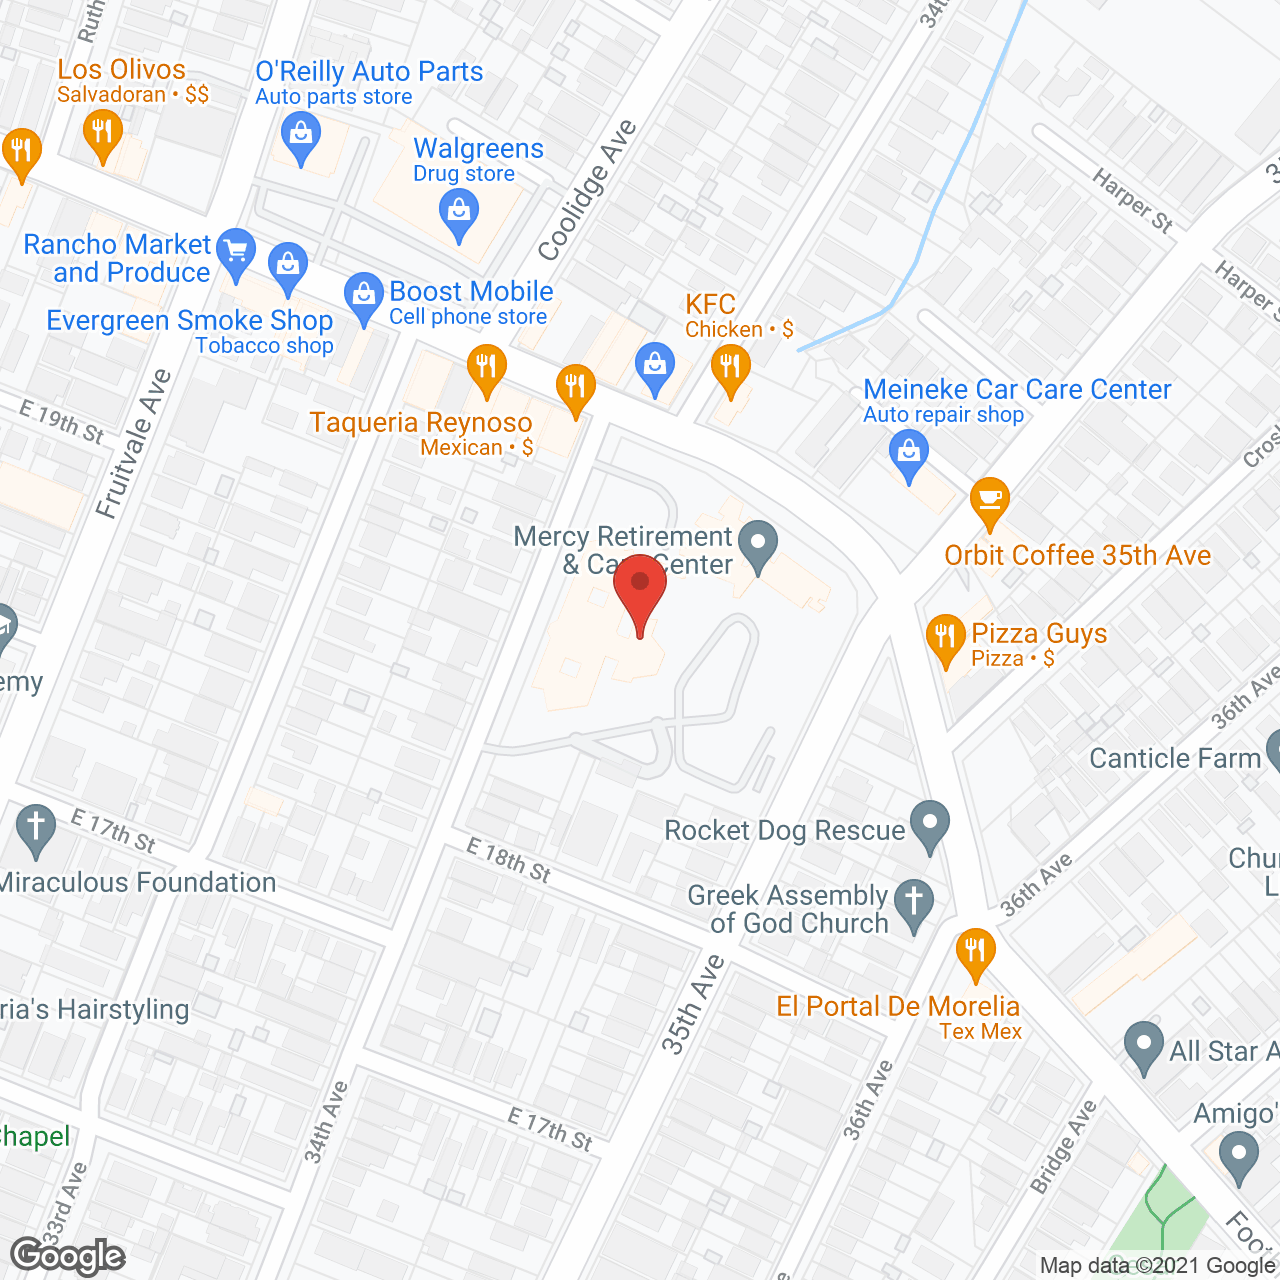 Mercy Retirement and Care Center in google map